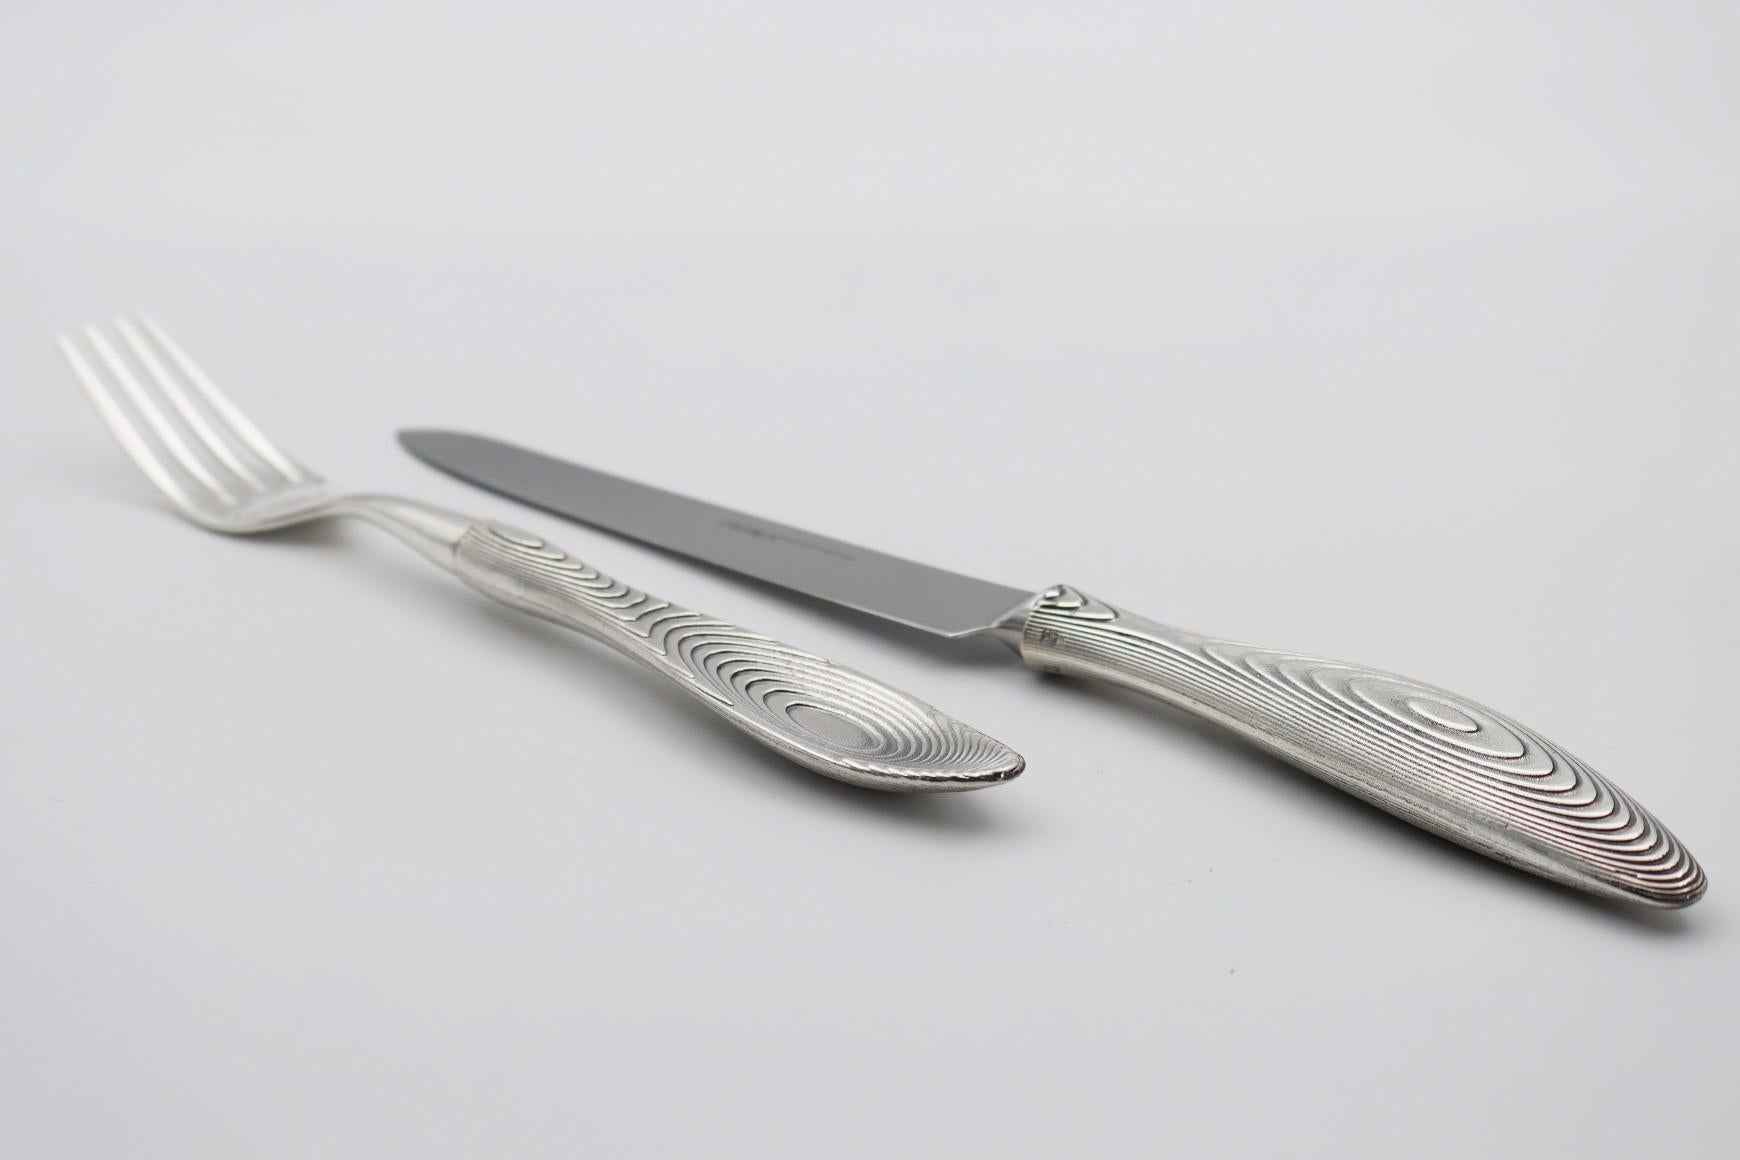 Set of 2 pieces in silver bronze or gold bronze

Set of 2 pieces (table forks/fish, table knife or meat/fish knife) in silver bronze 35/42 microns

It is possible to order all products separately or set of 4 piece

Table spoon
Table